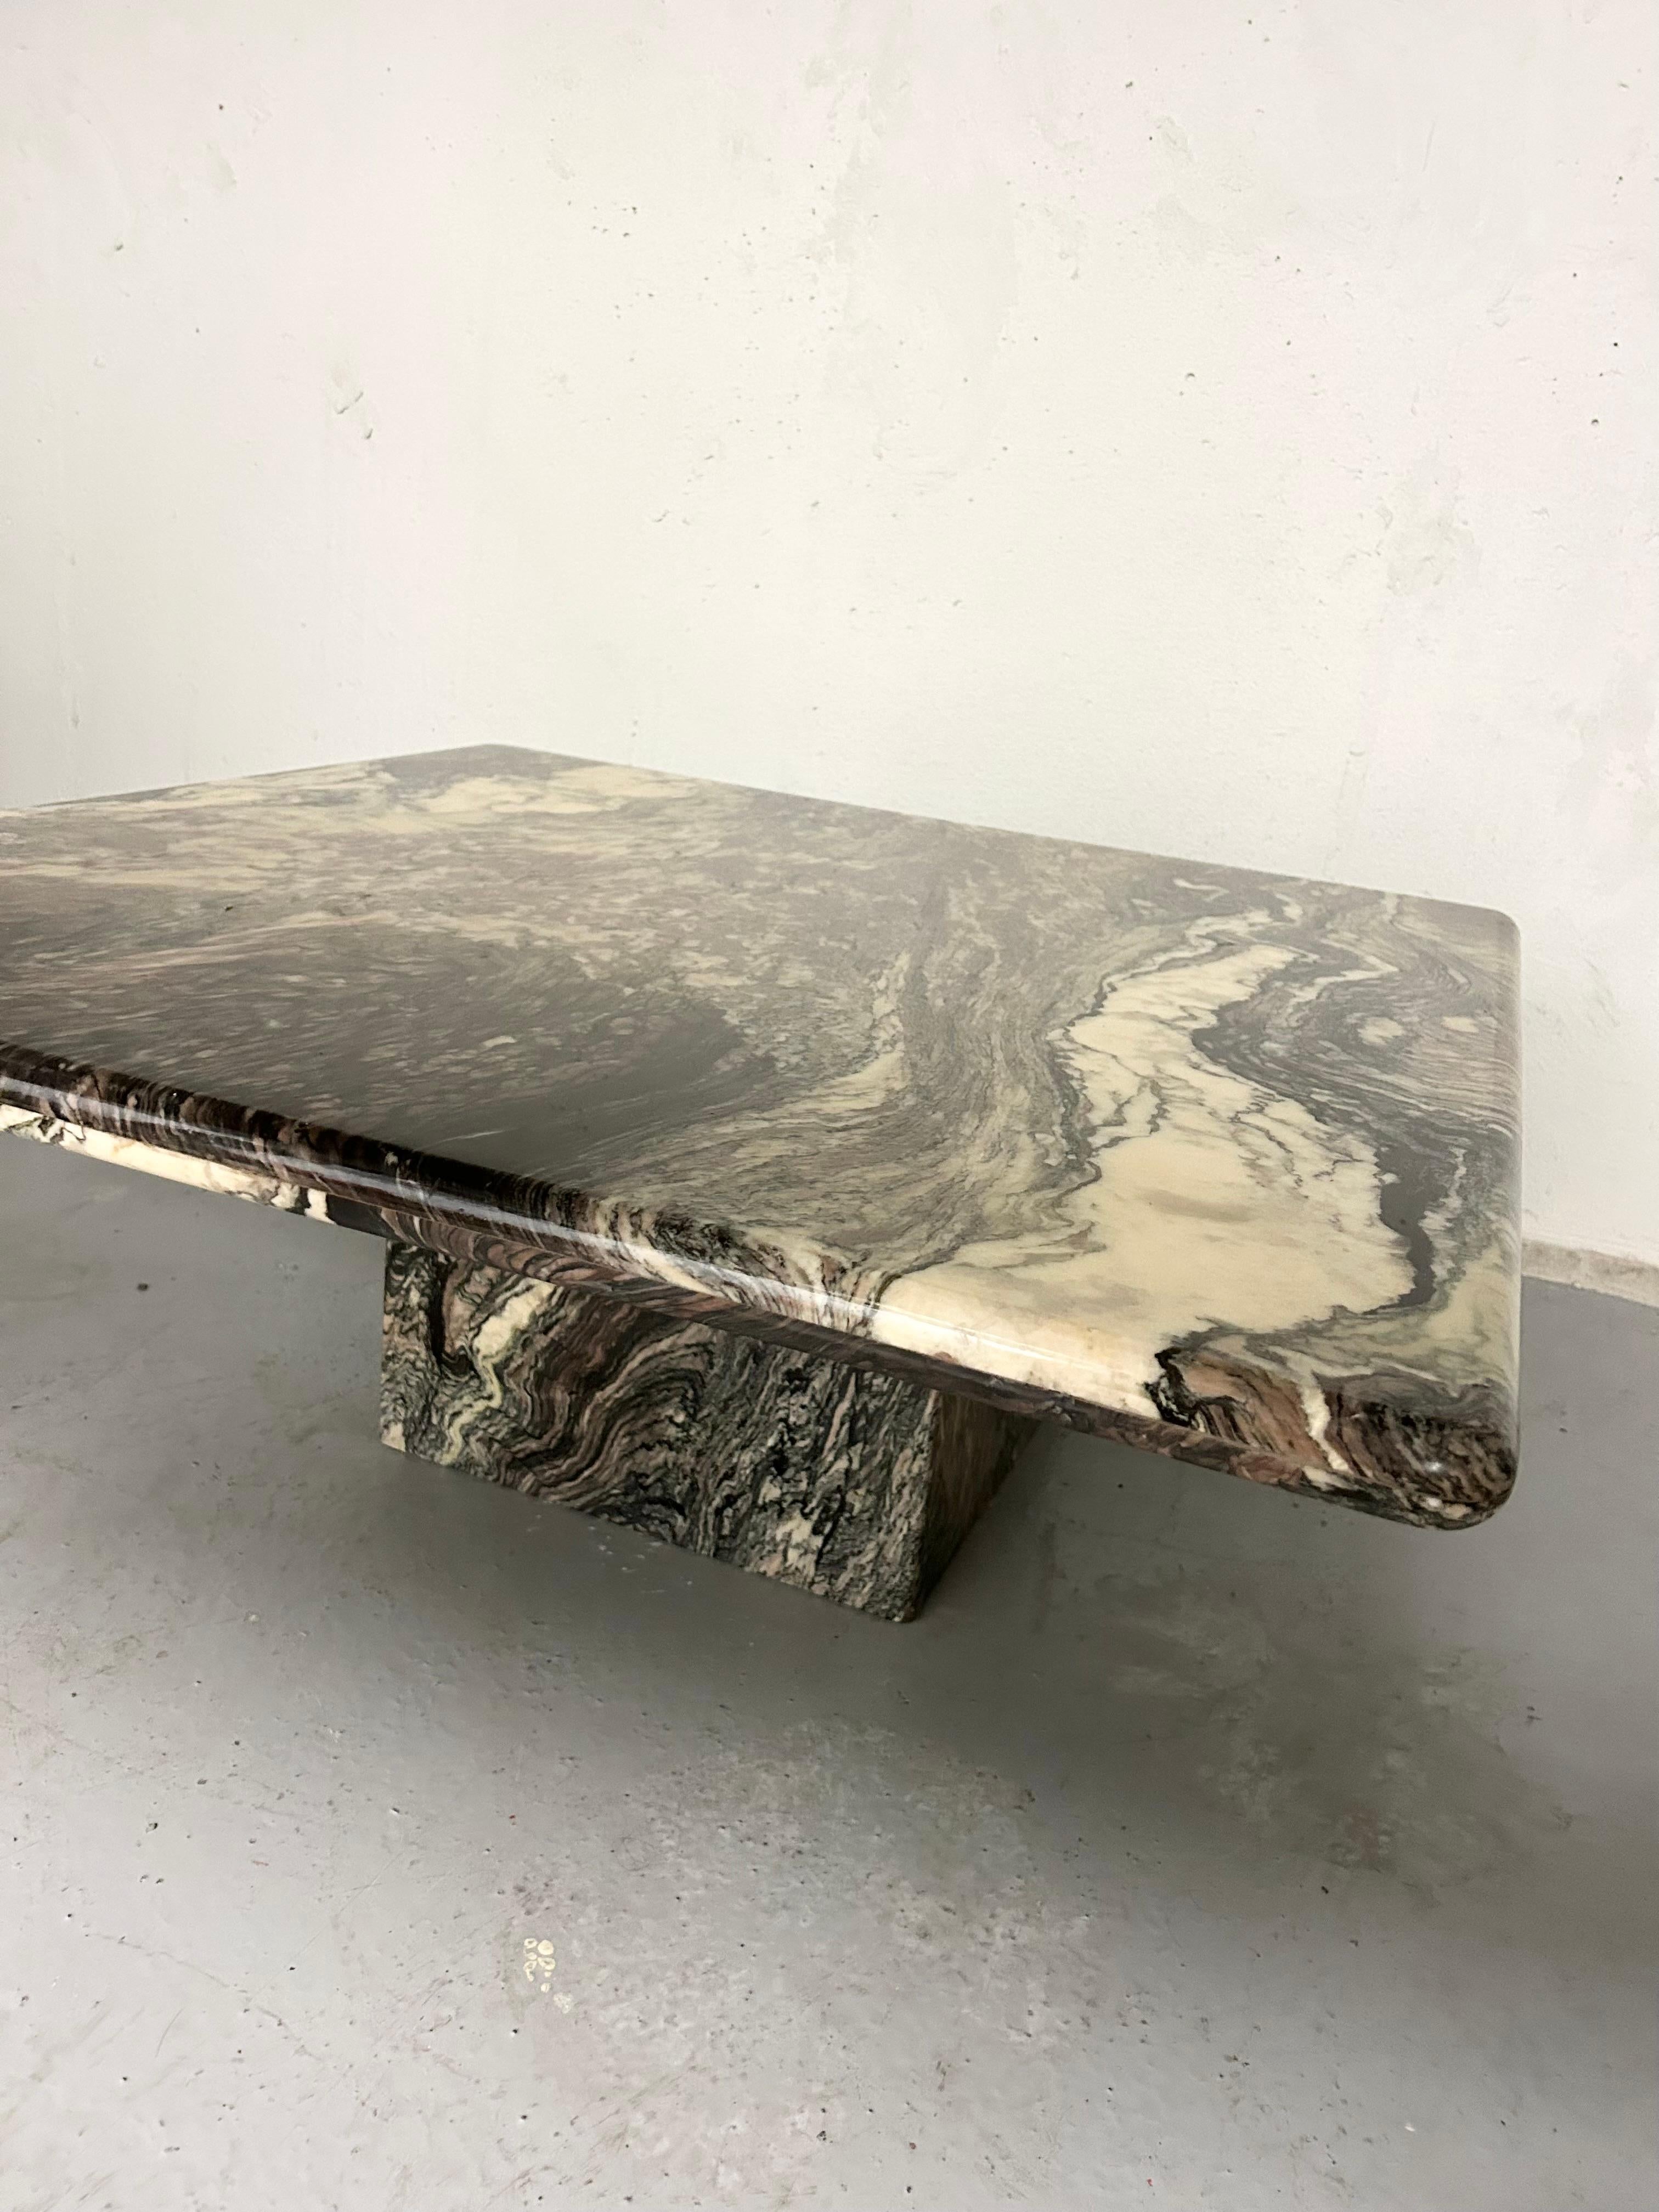 Vintage cipollino ondulato marble coffee table. Made in Italy. Notes of cream, brown, and black. Rounded edges. Top sits on hollow marble square. Minimal wear. No chips or cracks. 